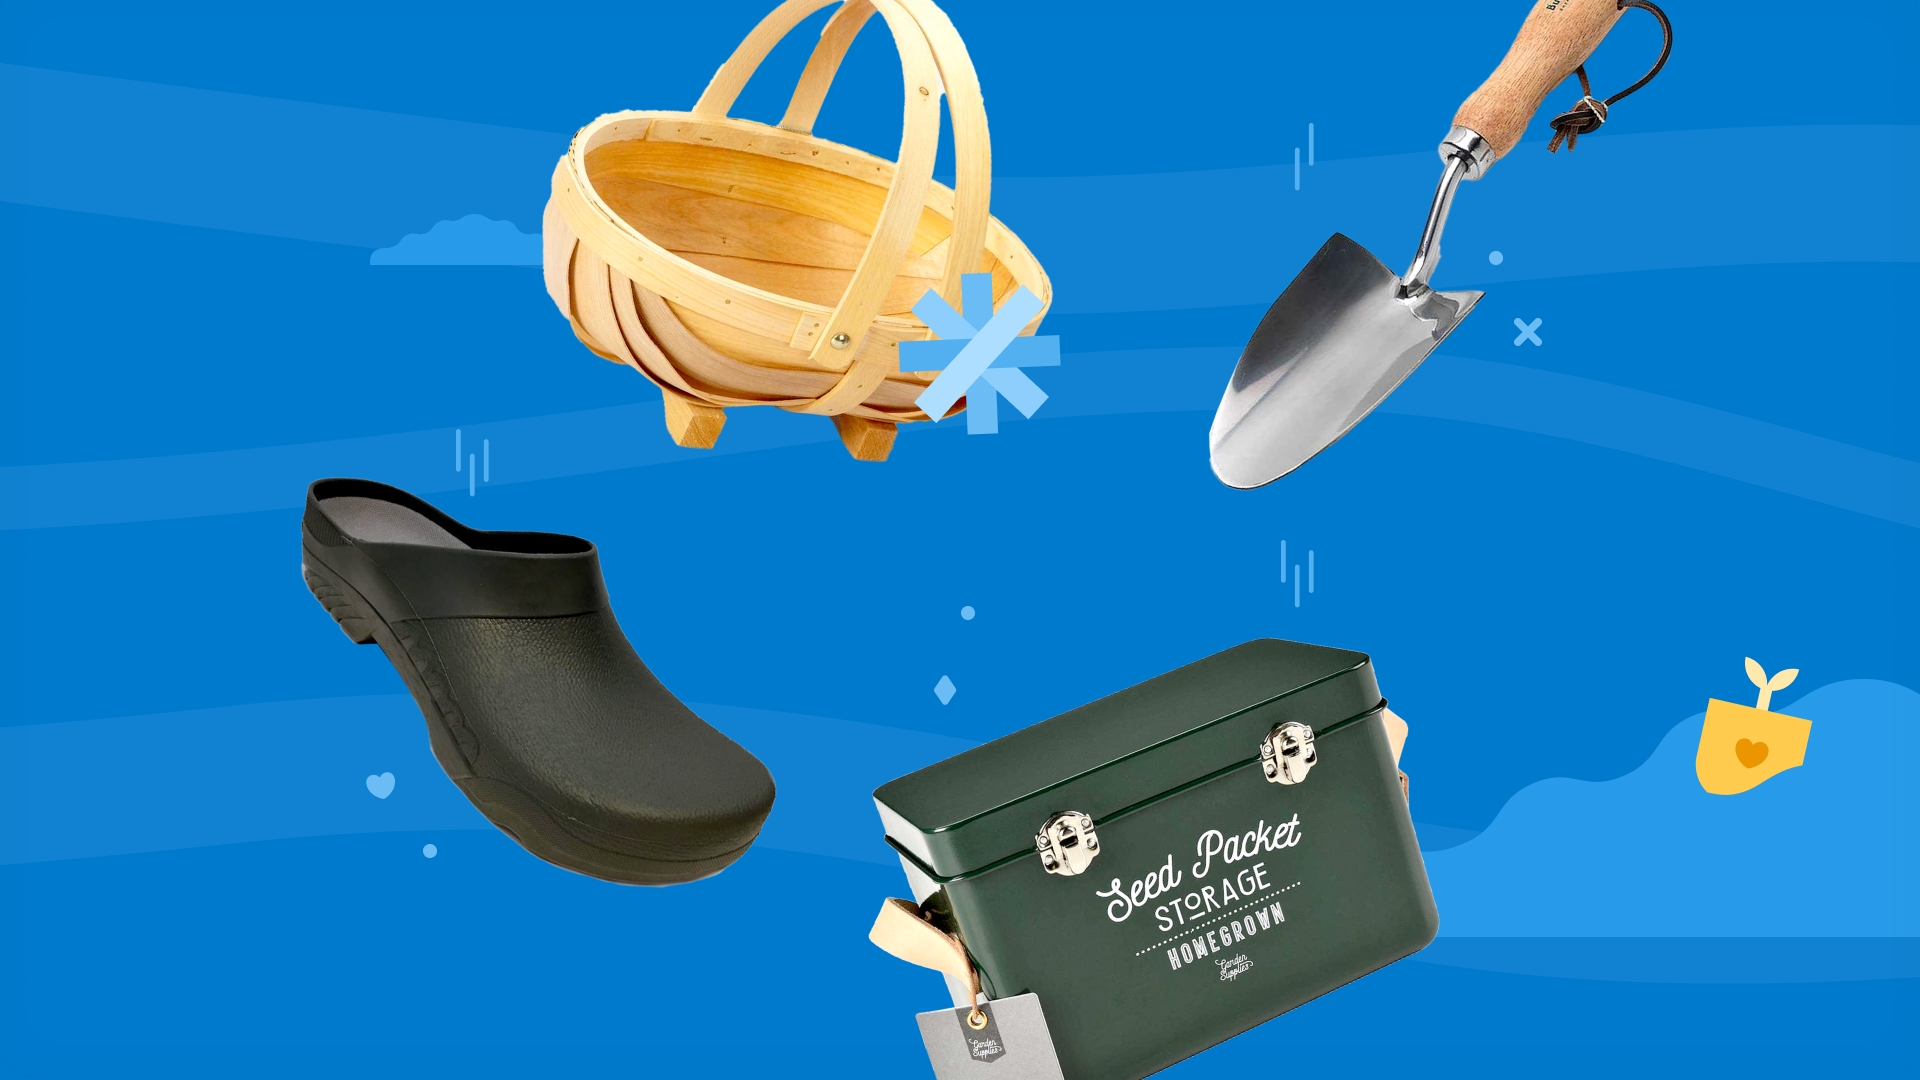 An array of gardening related gifts on a blue background - gardening shovel, garden trug, seed storage box and gardening shoes.